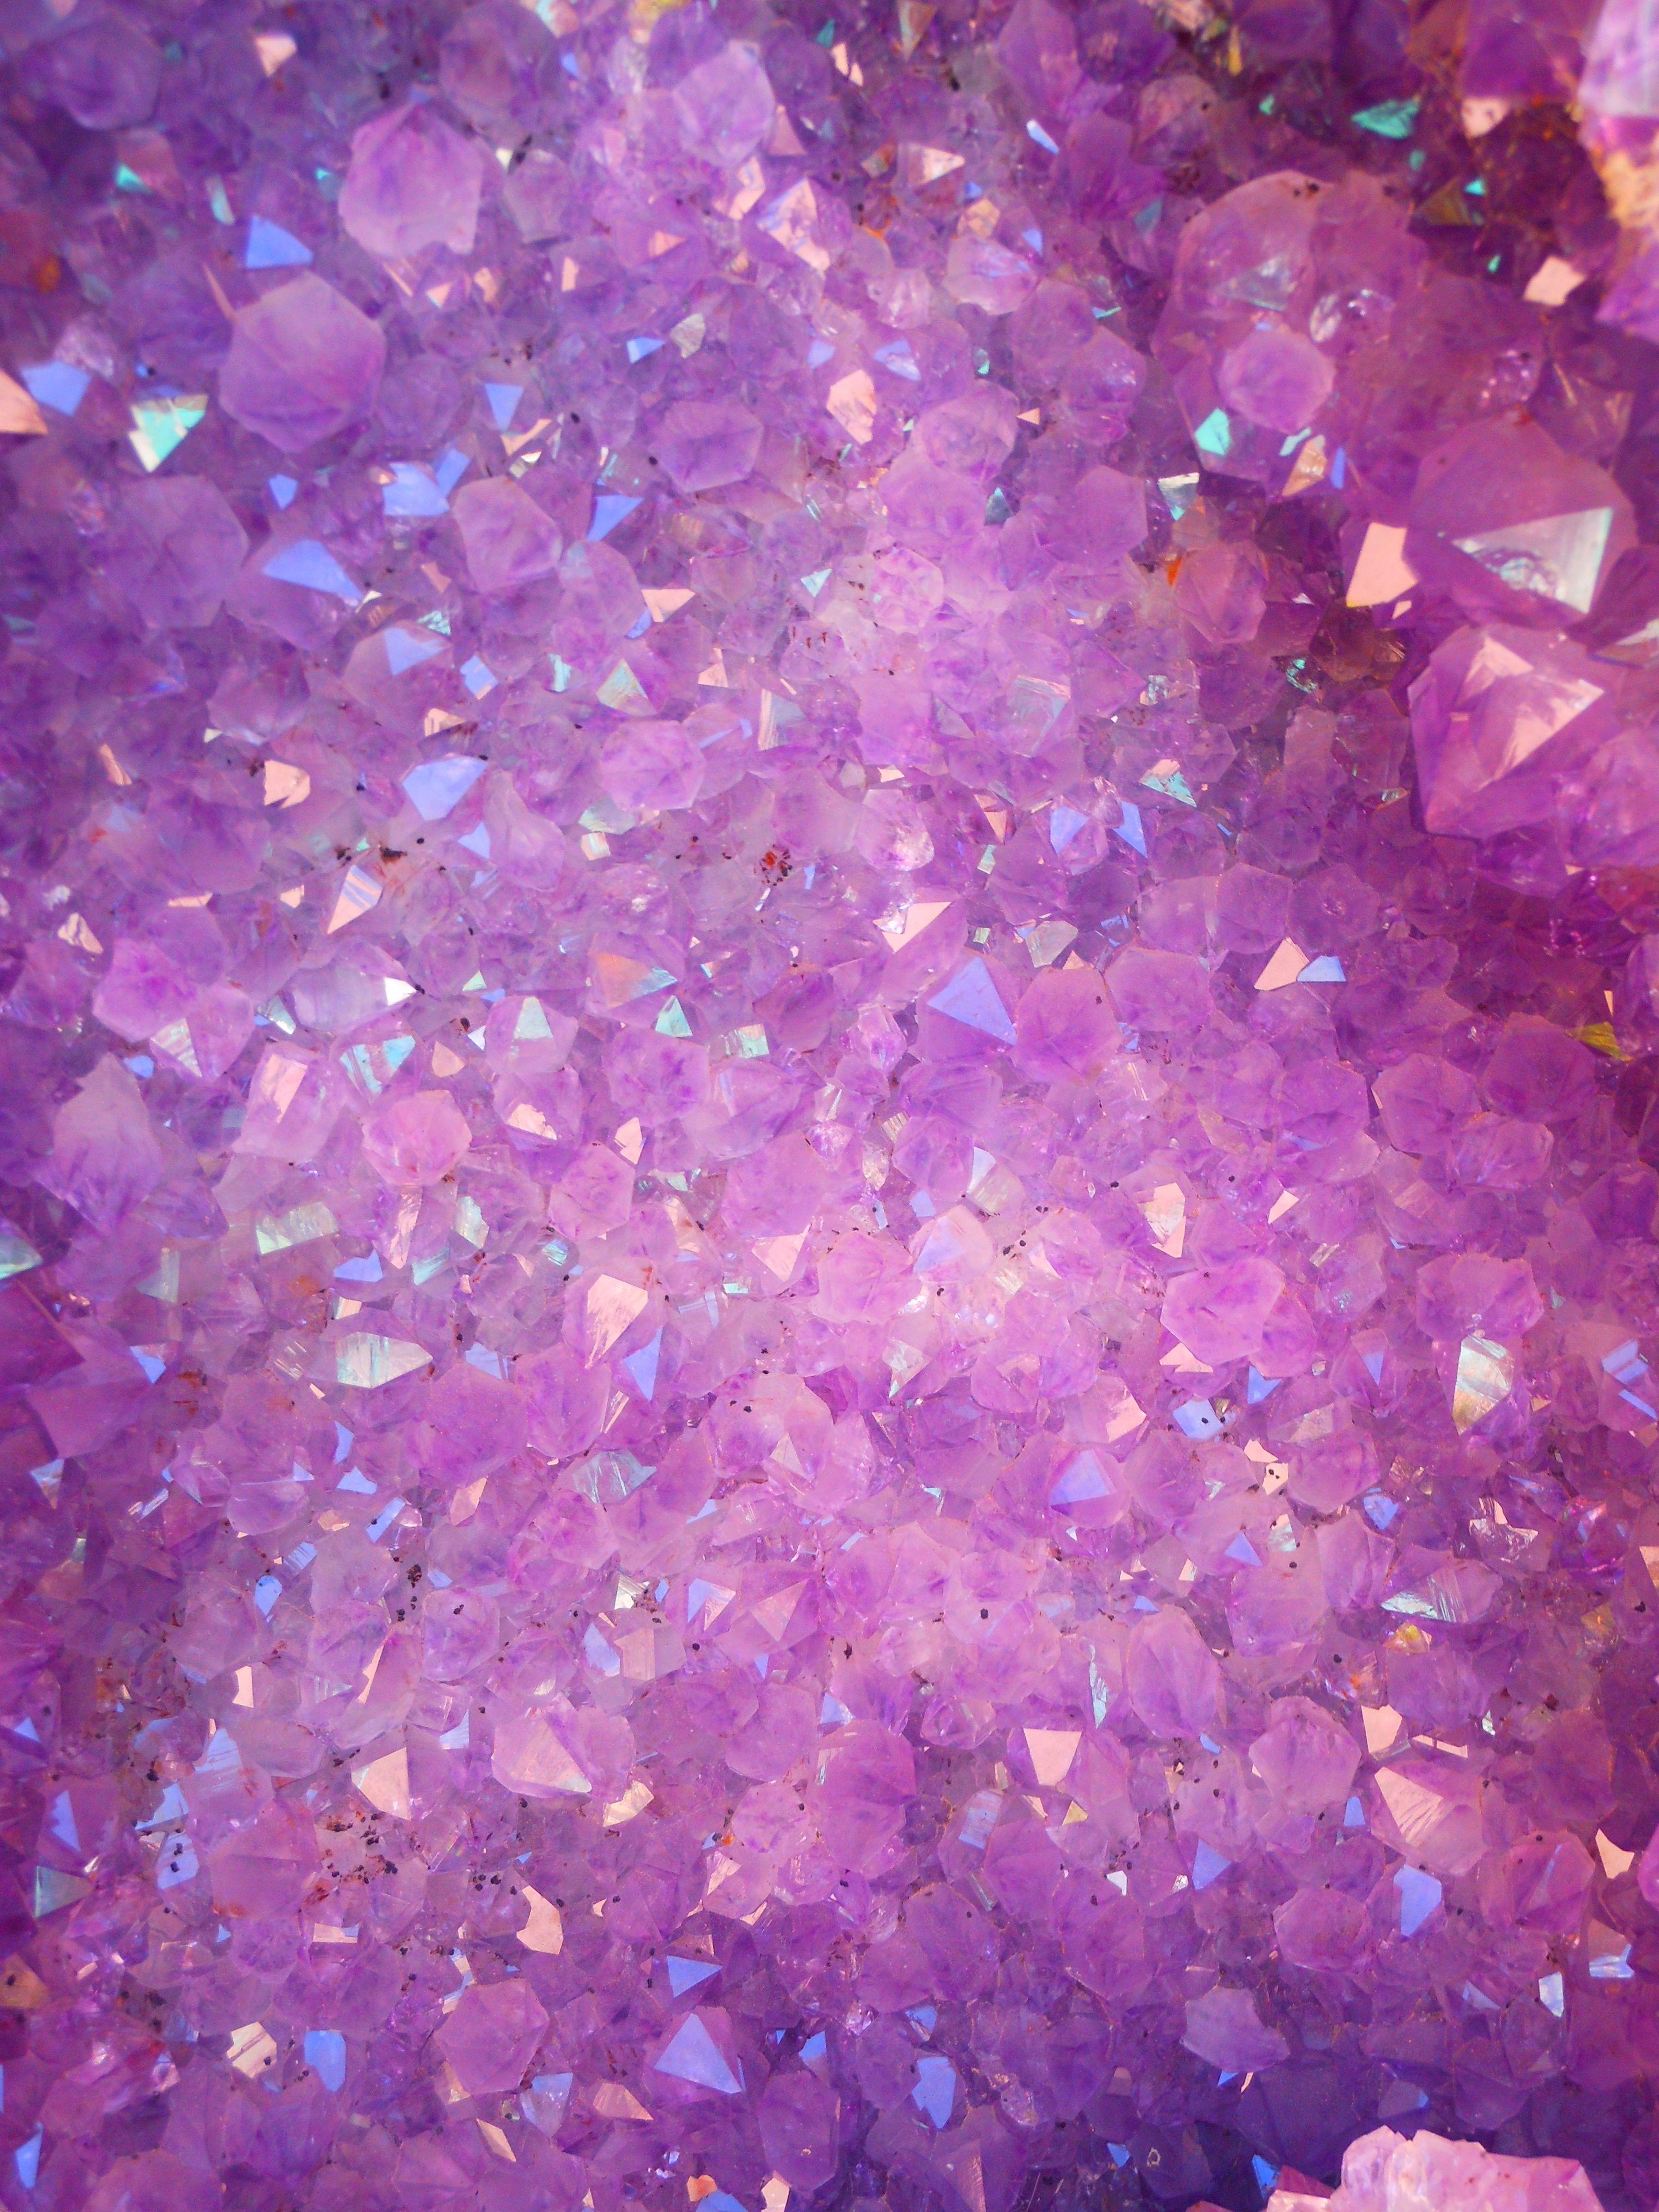 18 Facts About Amethyst That You Should Know - Facts.net